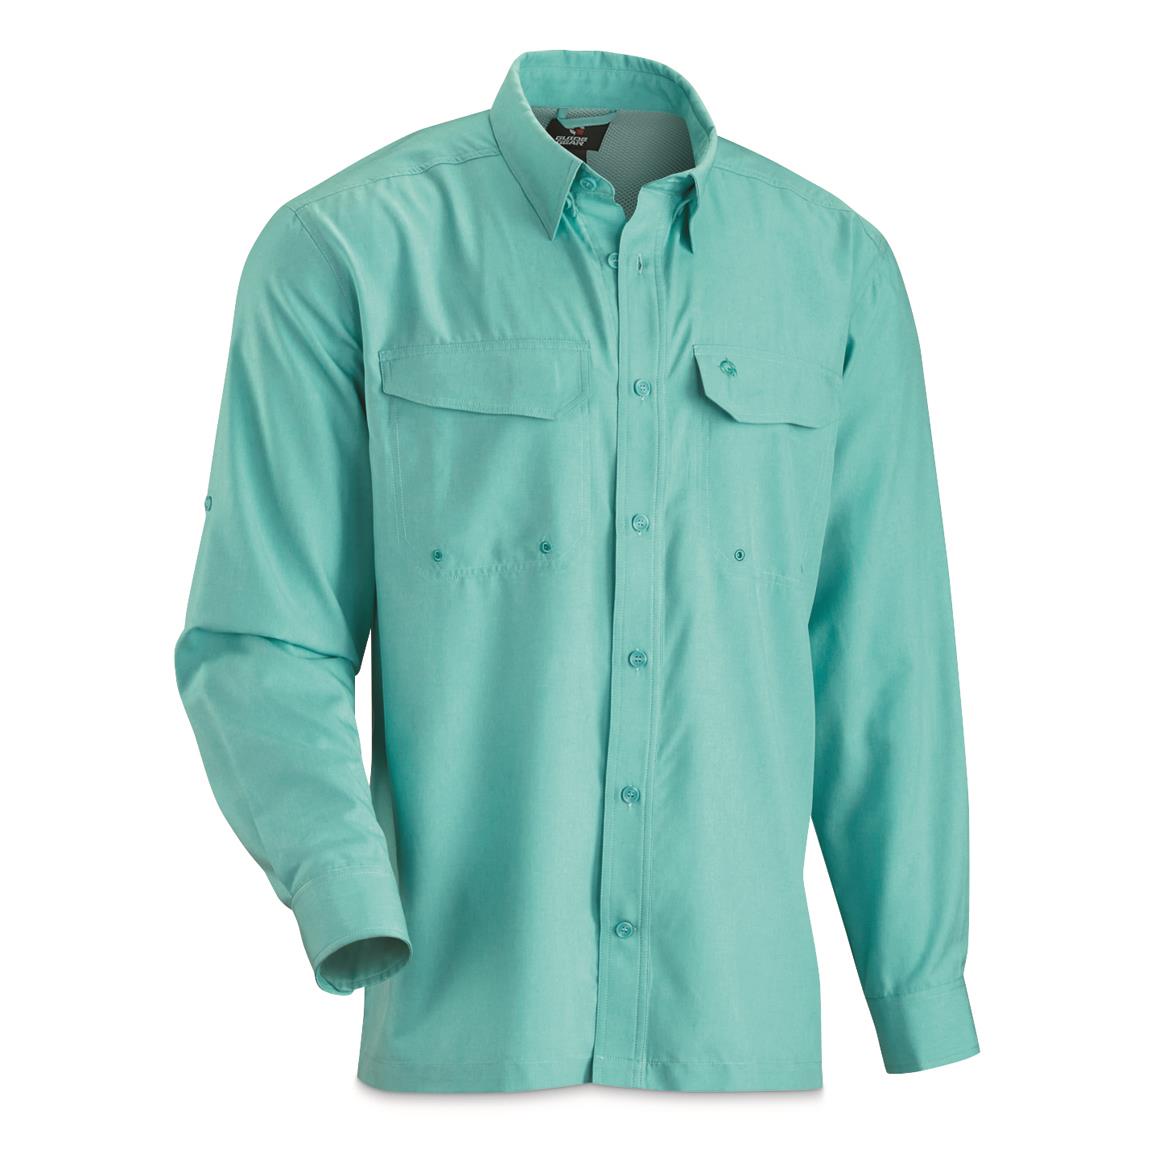 DKOTA GRIZZLY Men's Ryker Flannel-lined Shirt Jacket - 728008, Shirts ...